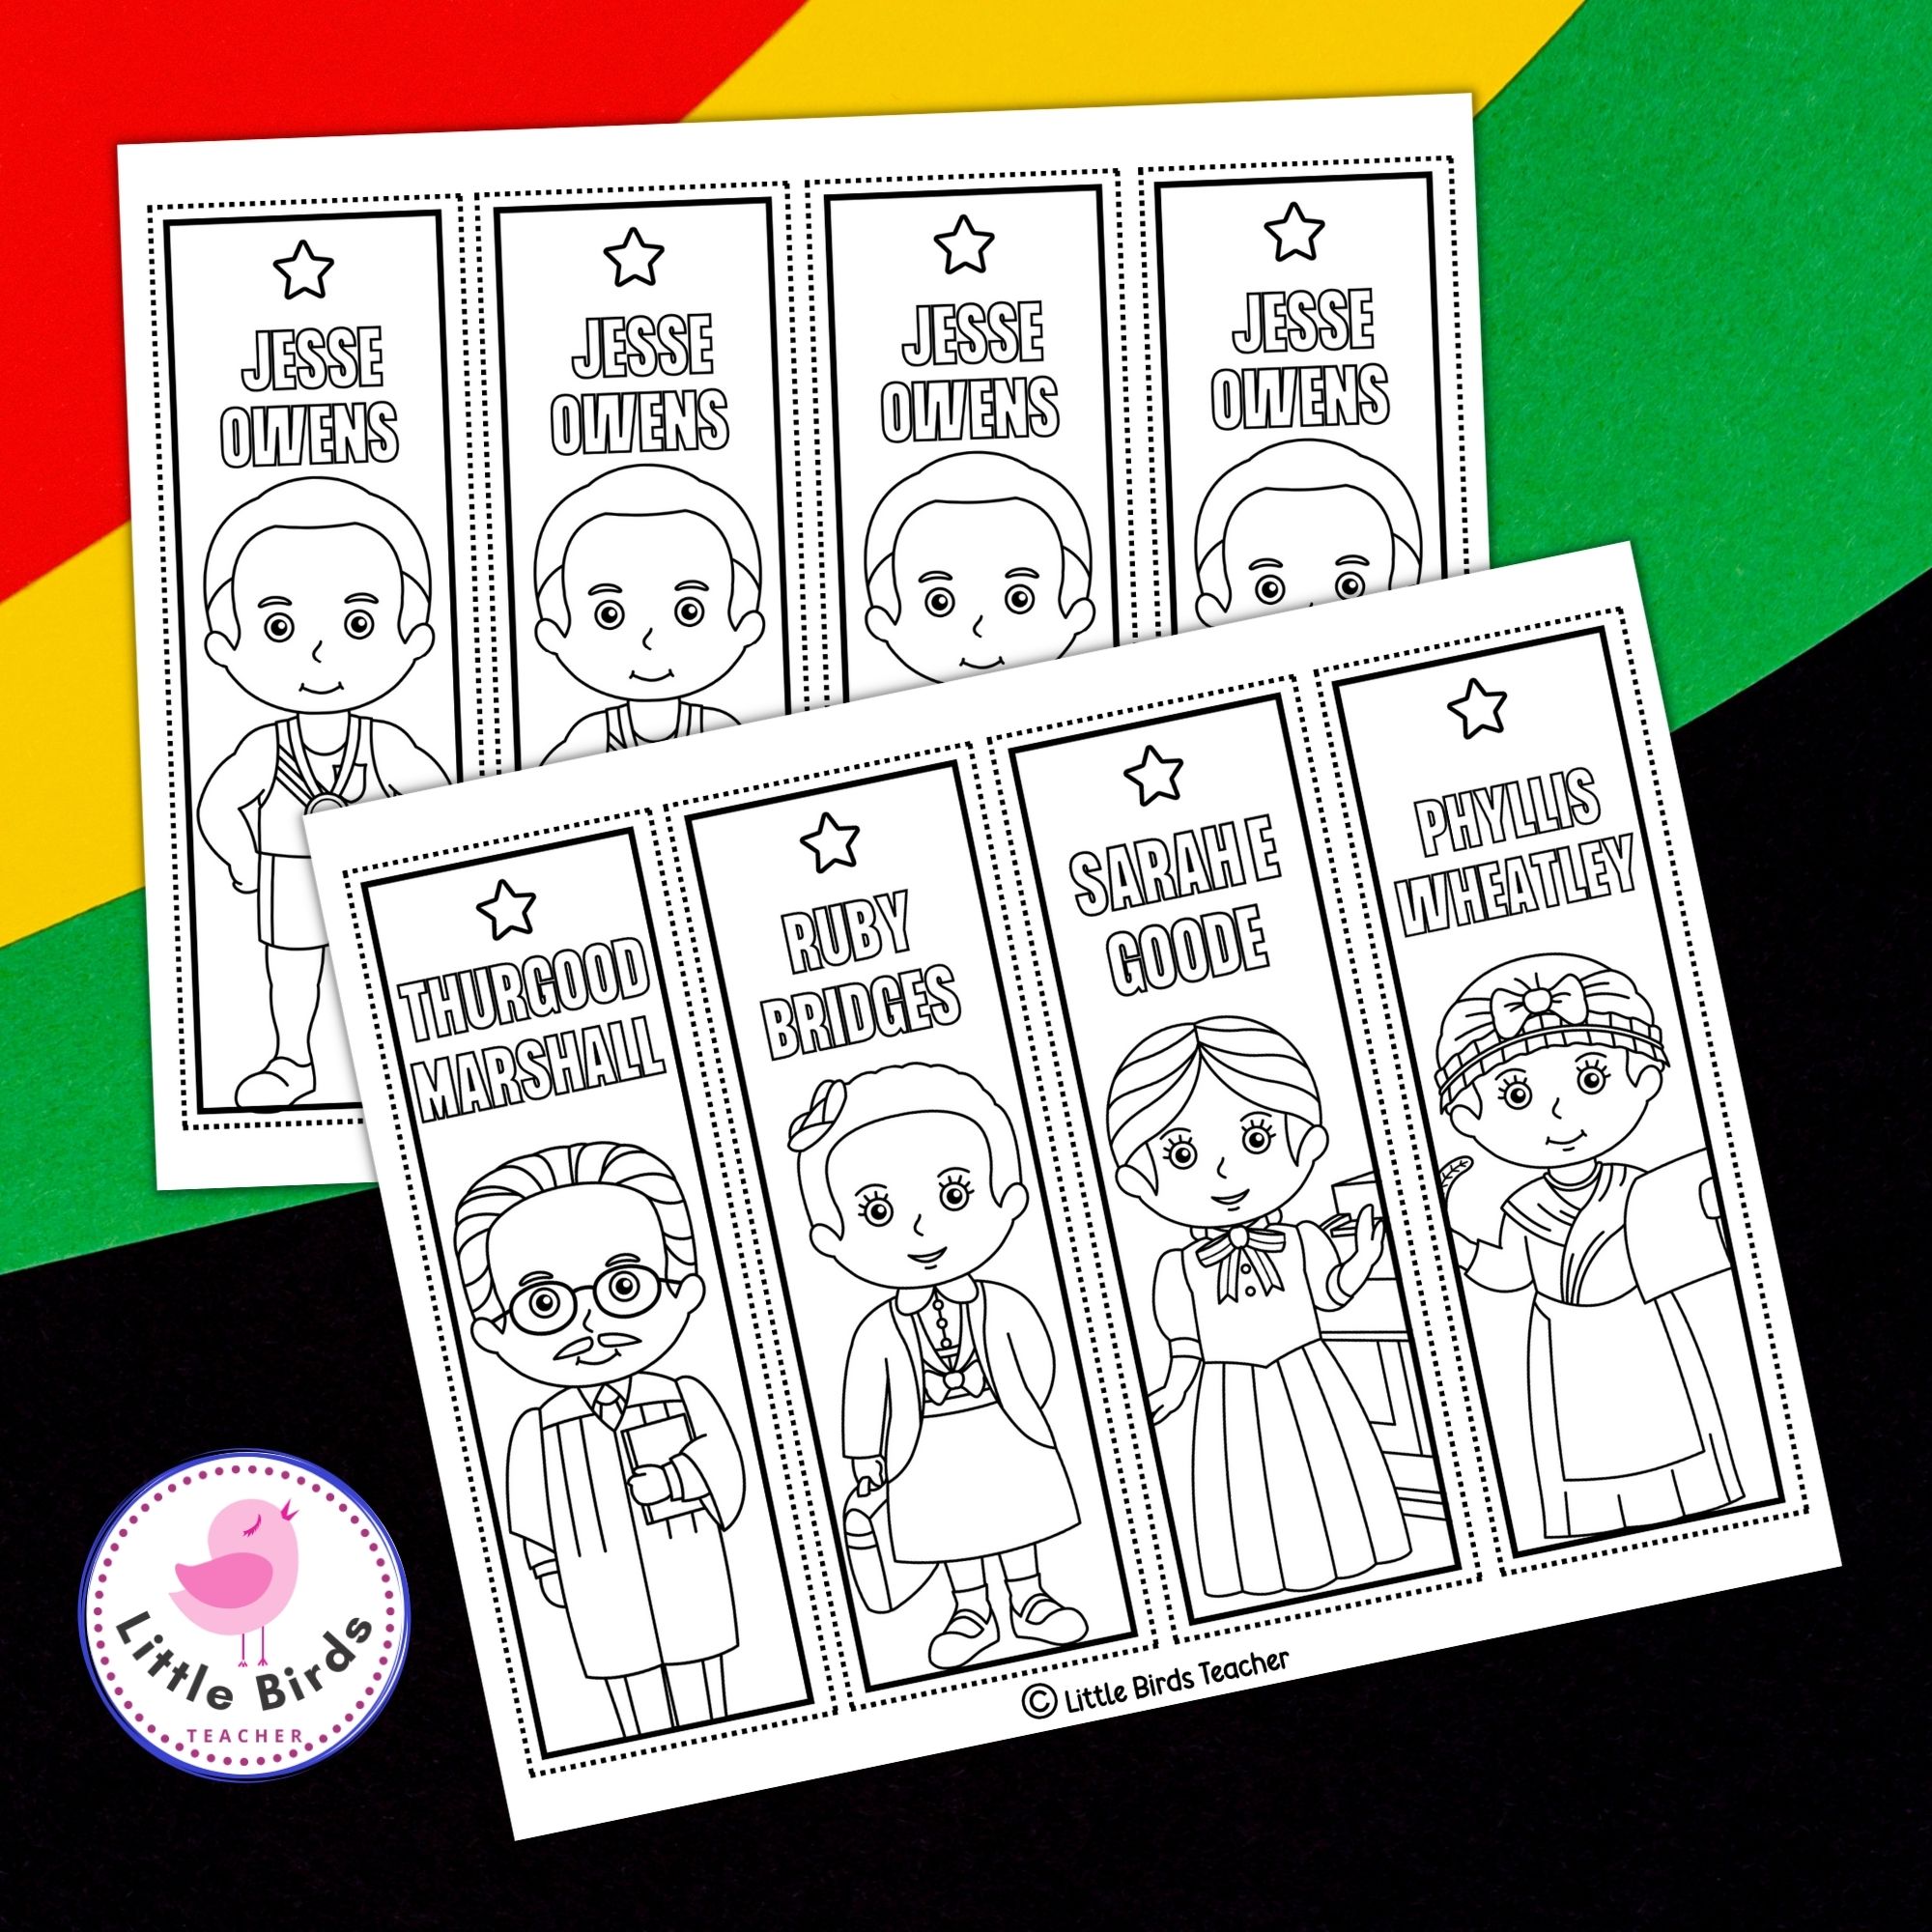 Black history month coloring bookmarks civil right activists bookmarks made by teachers